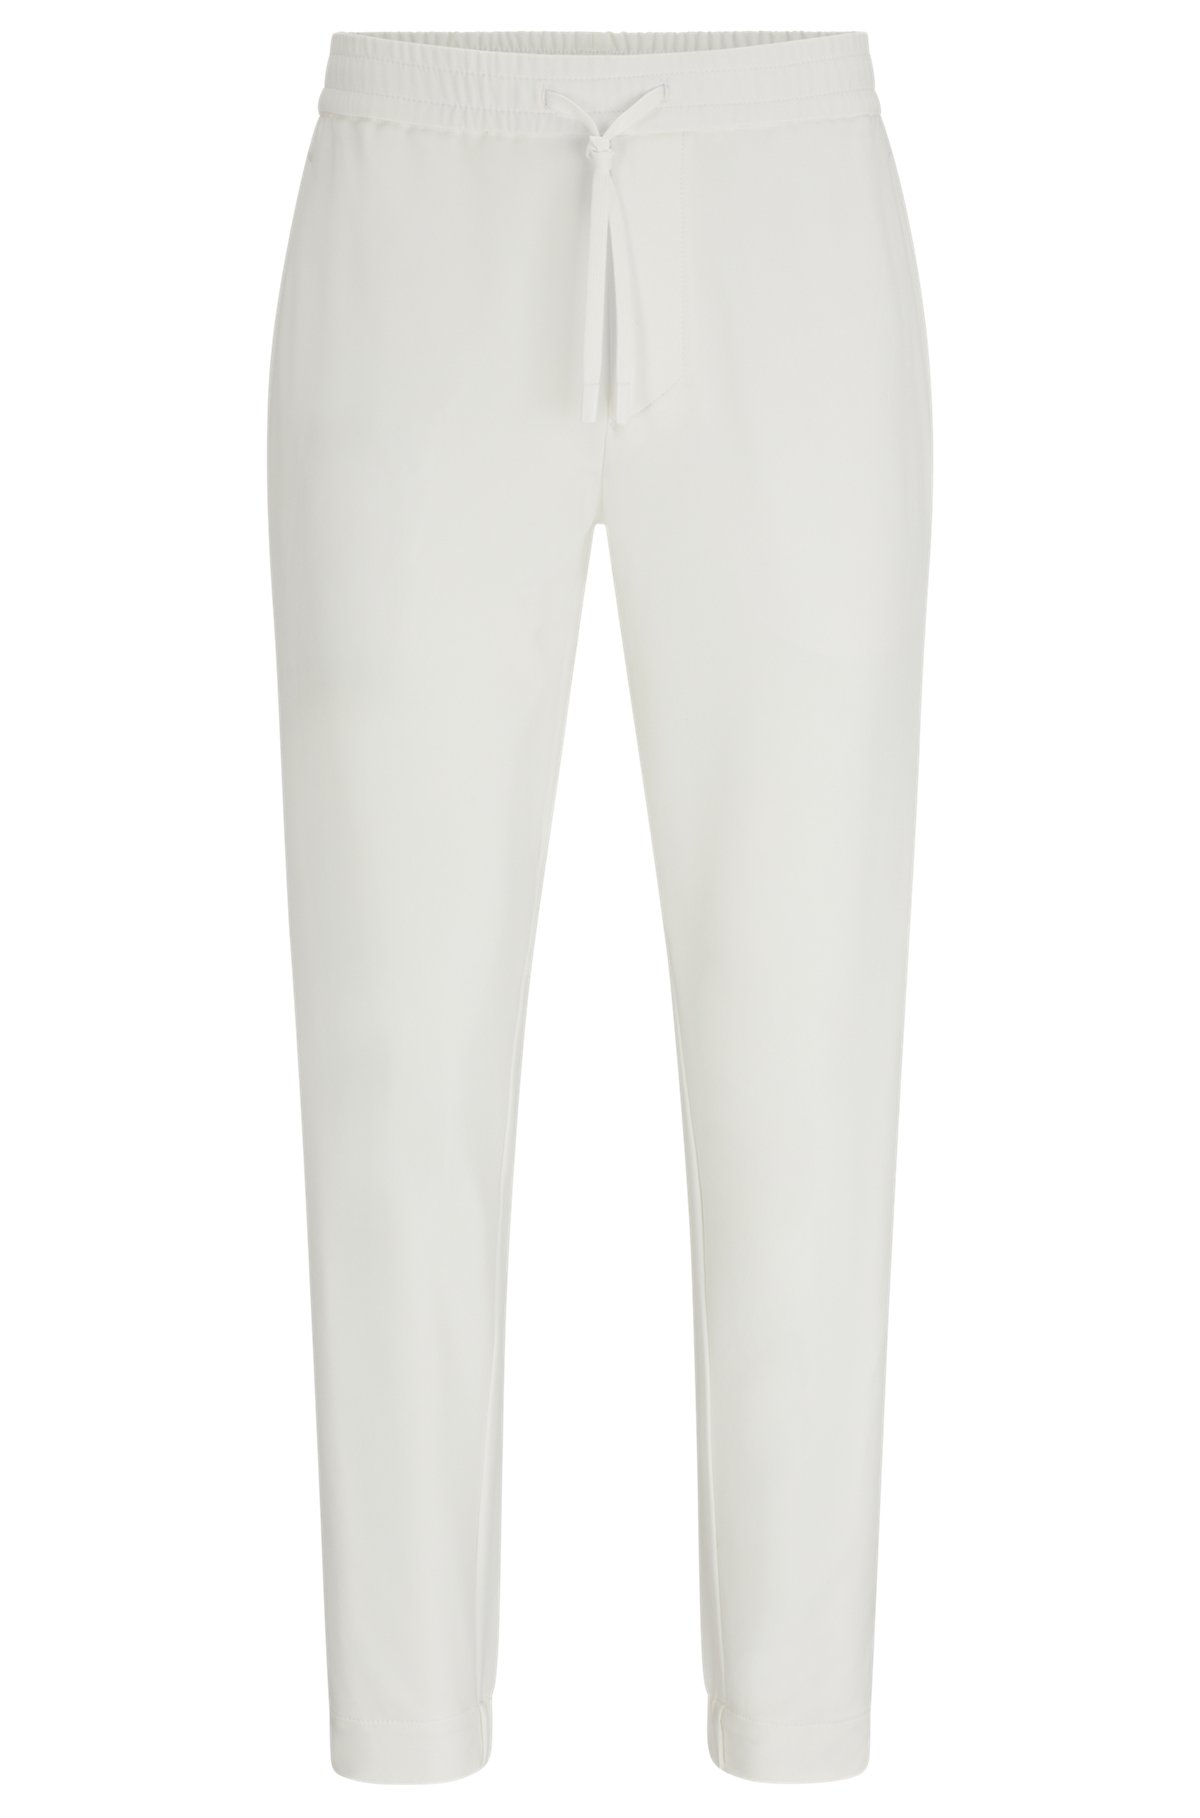 Tapered-fit chinos in easy-iron four-way stretch fabric, White